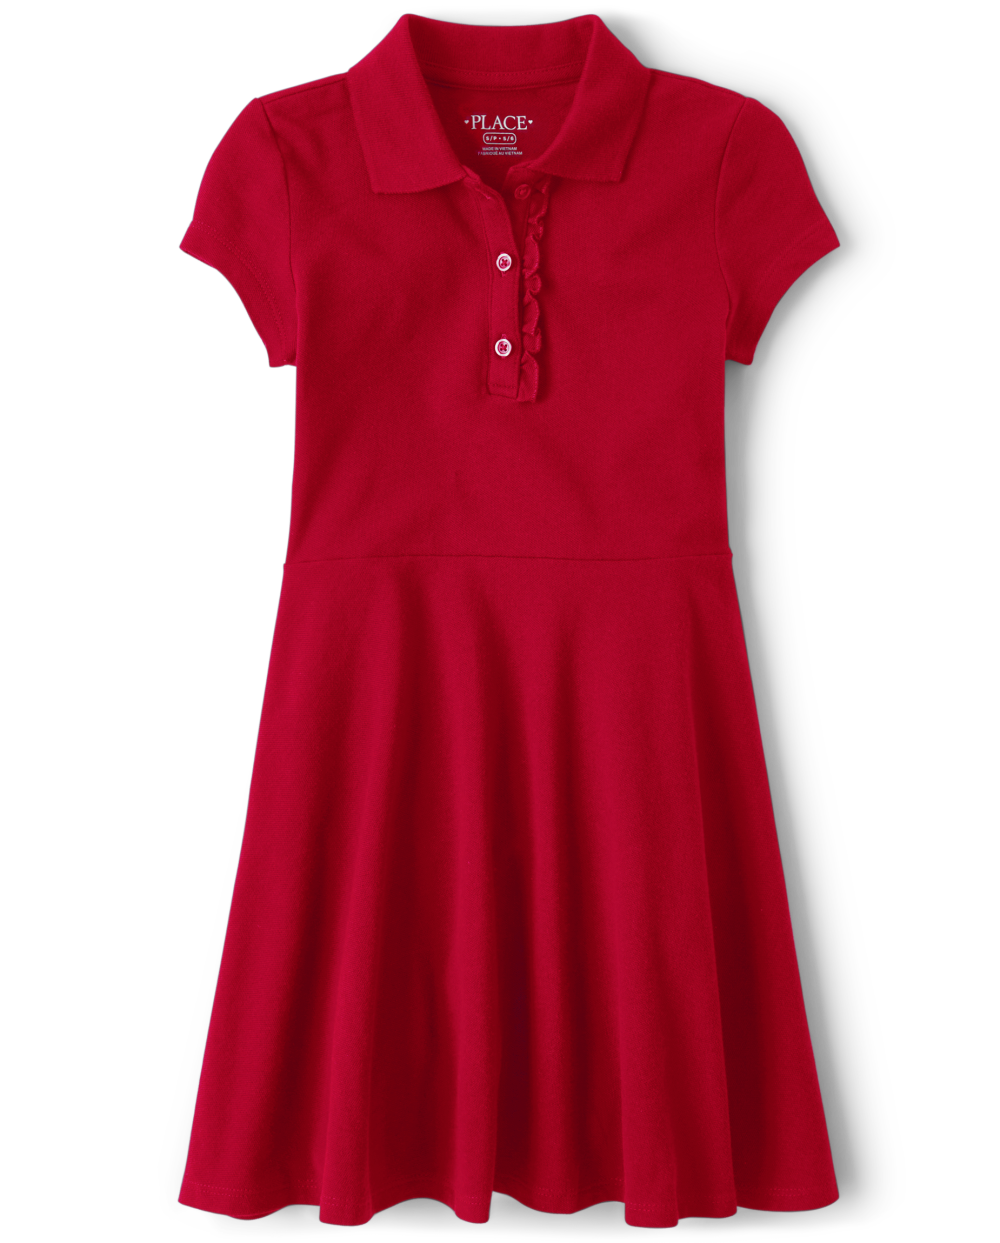 Girls Short Sleeves Sleeves Above the Knee Collared Ruffle Trim Dress